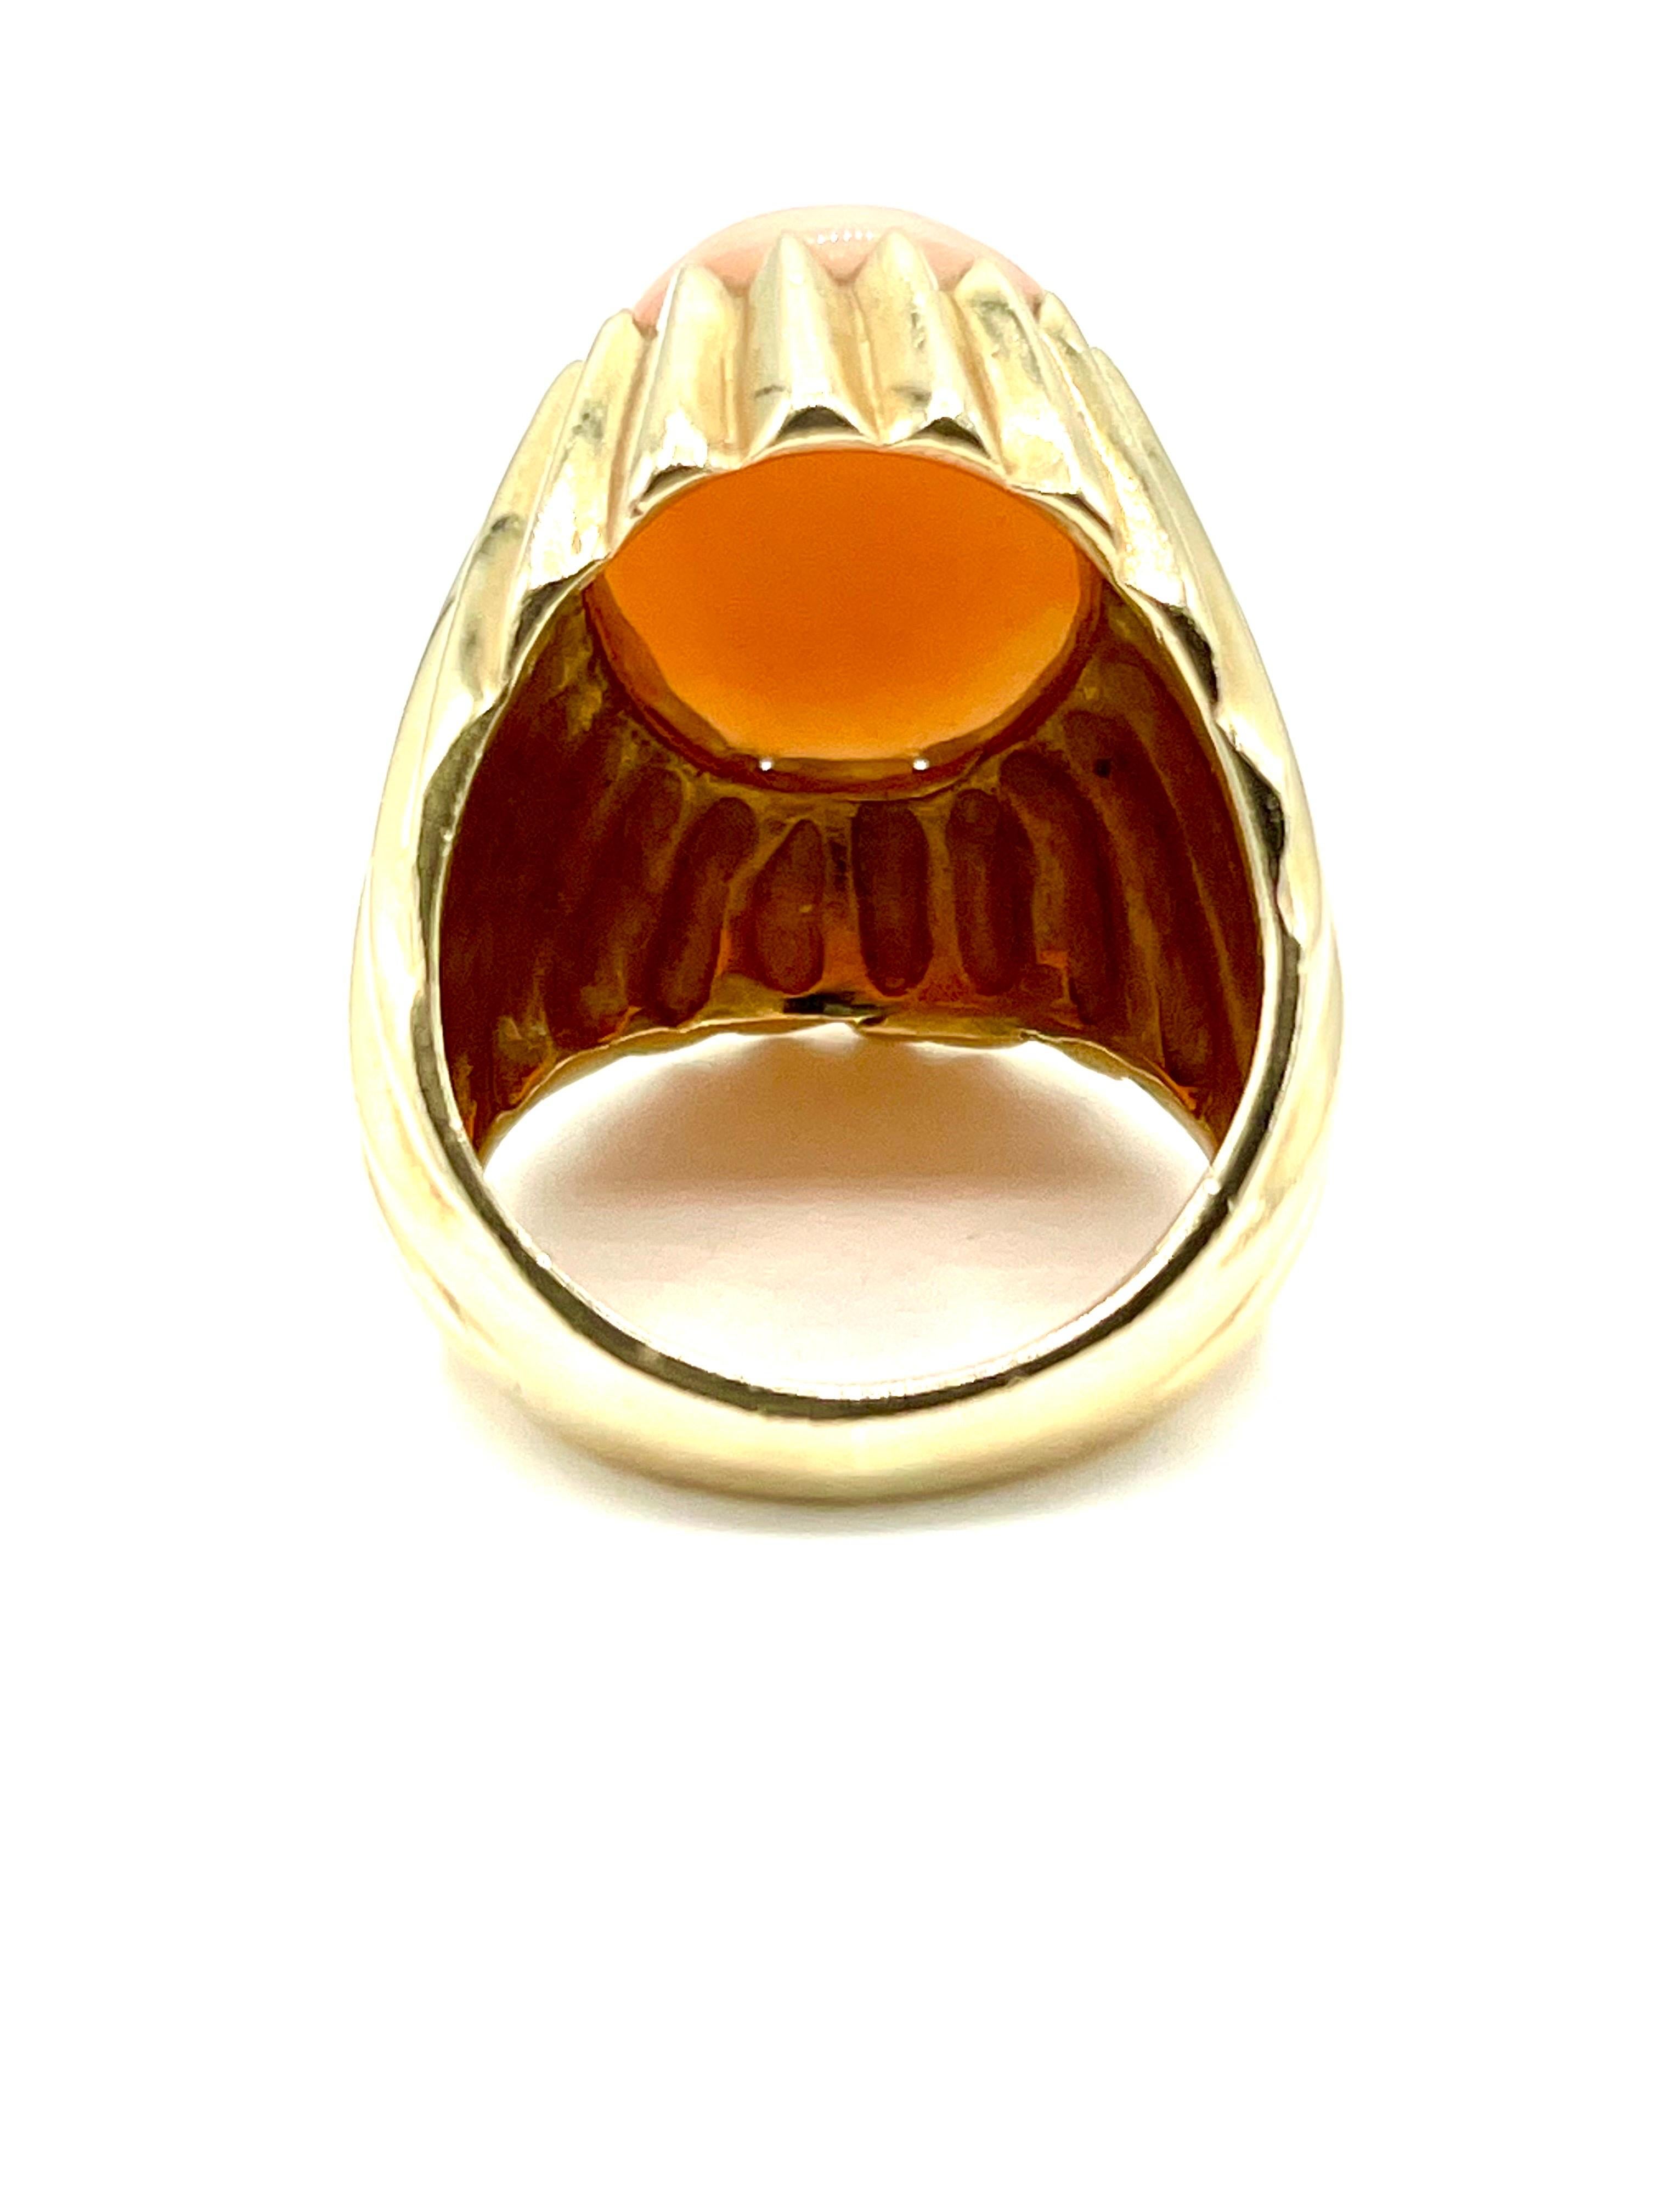 Cabochon Angel Skin Coral Bombe' Style Yellow Gold Cocktail Ring In Excellent Condition For Sale In Chevy Chase, MD